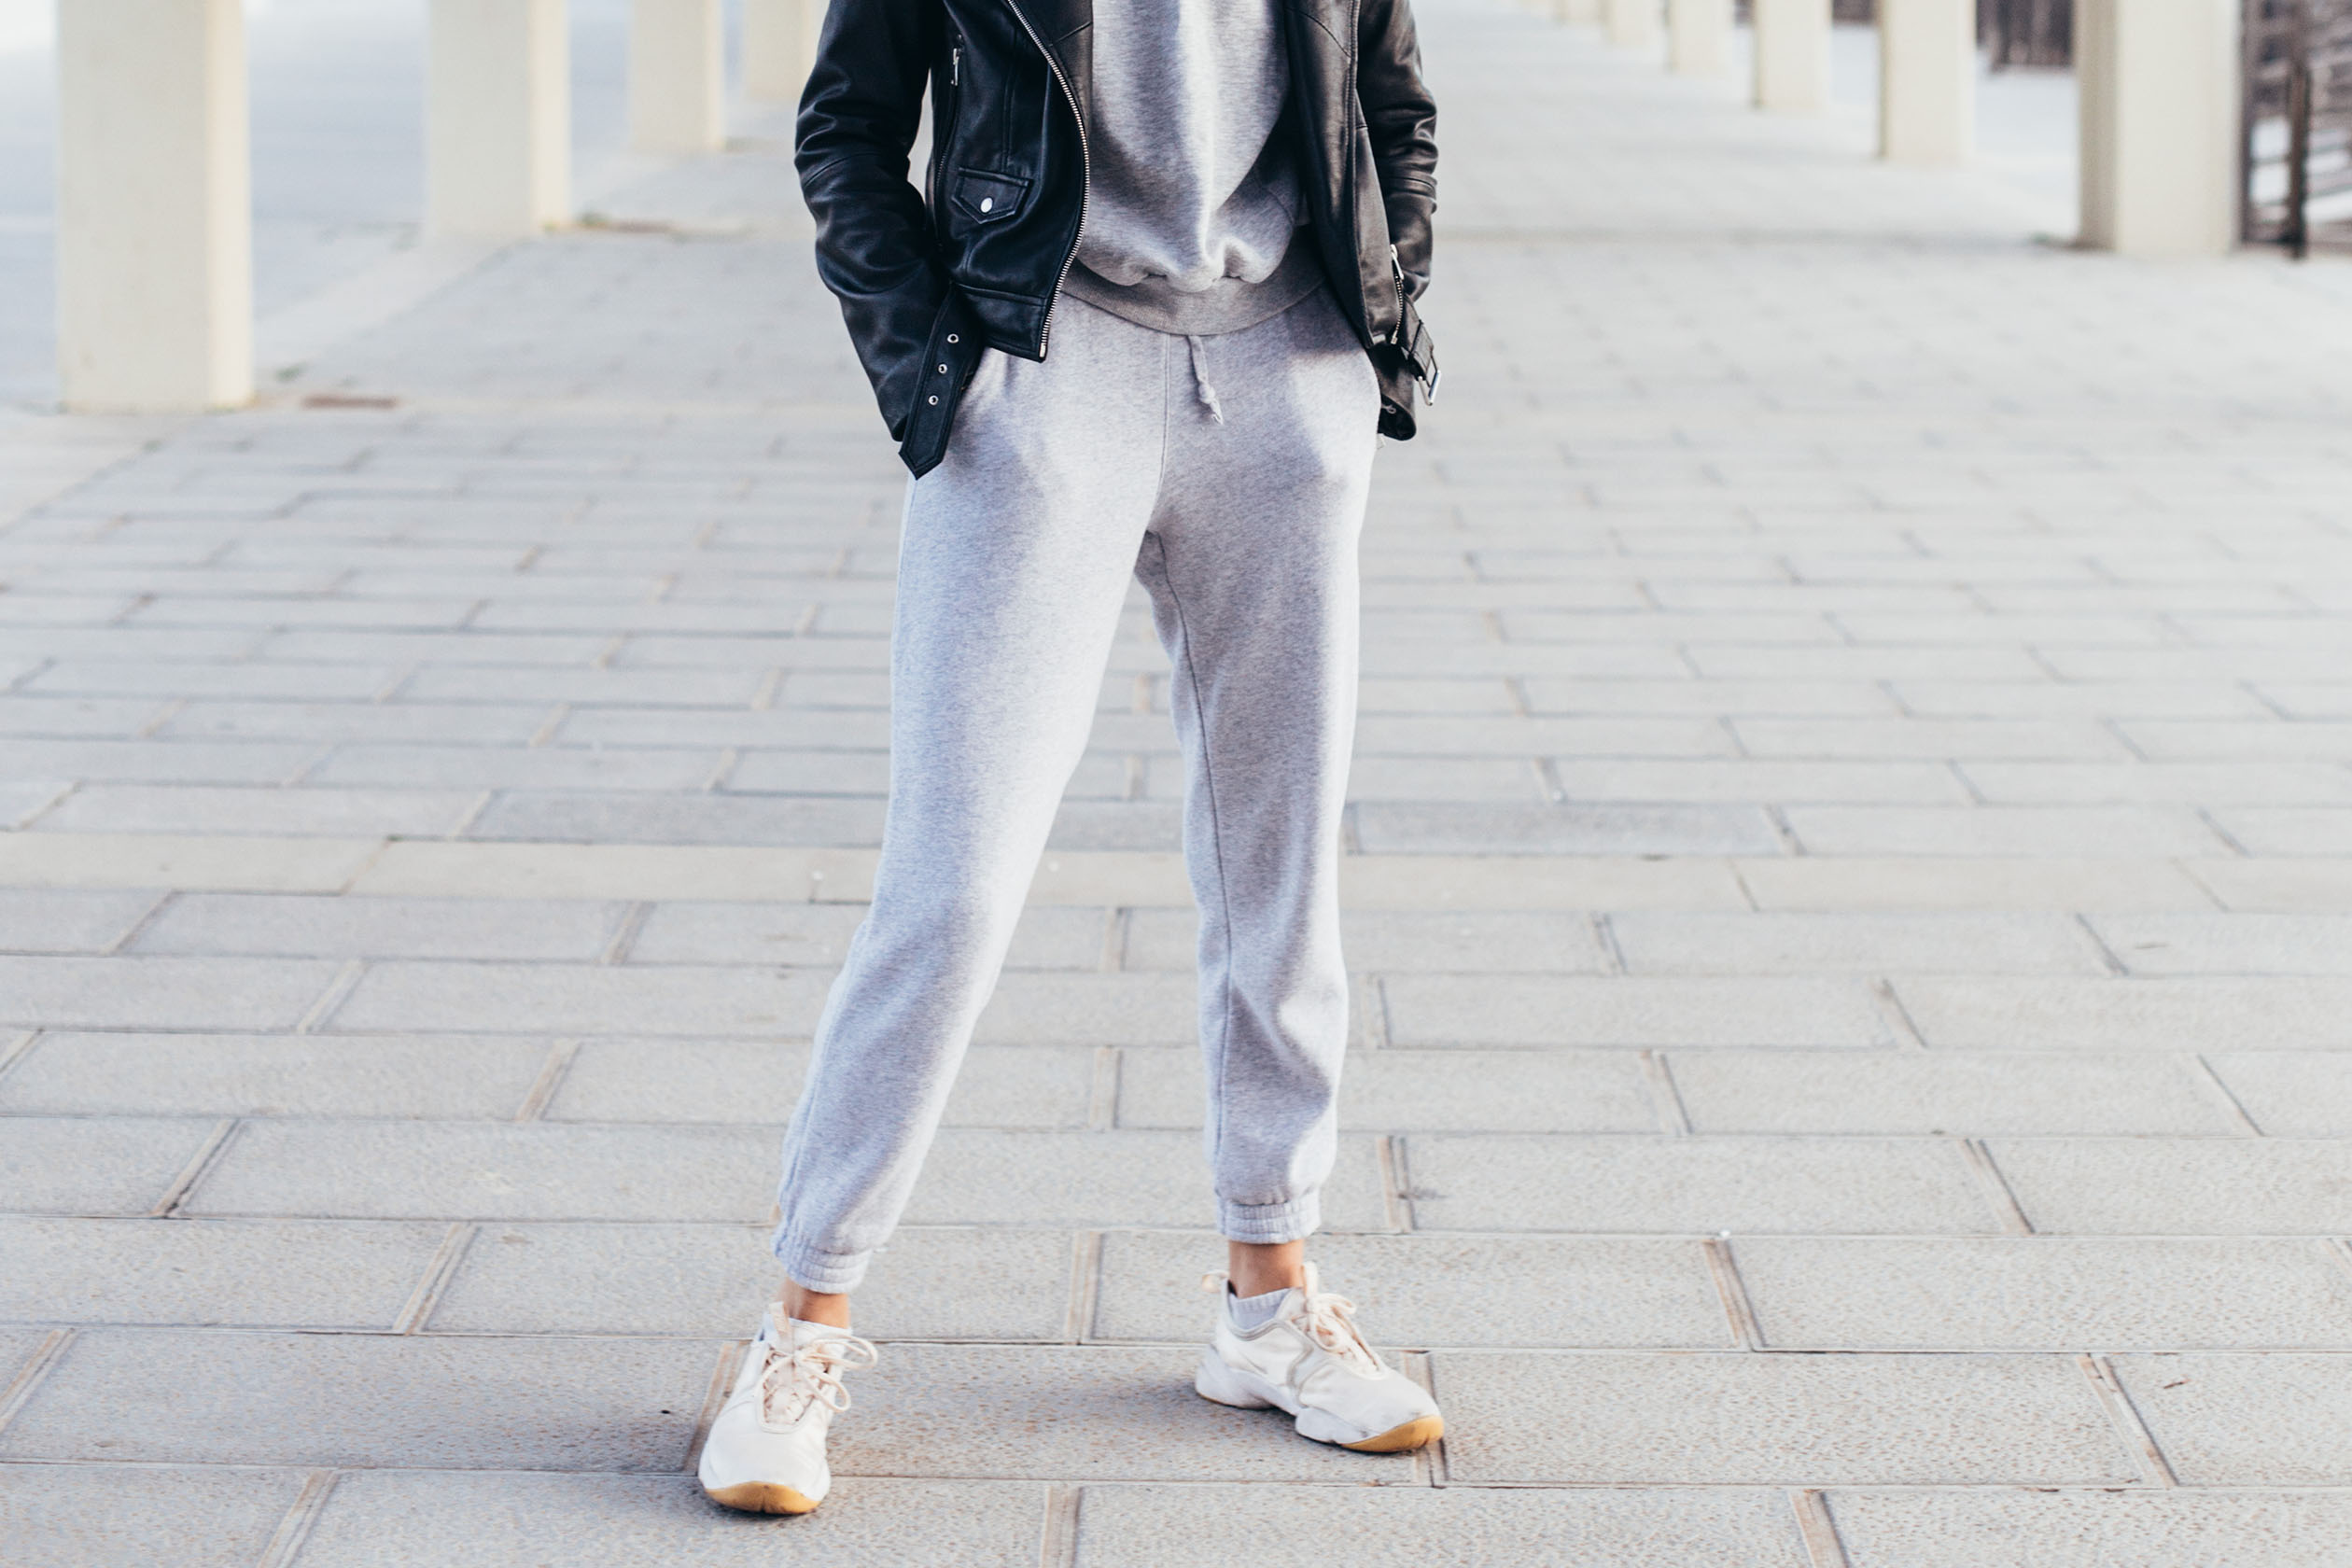 How to style sweatpants so you can wear them anywhere